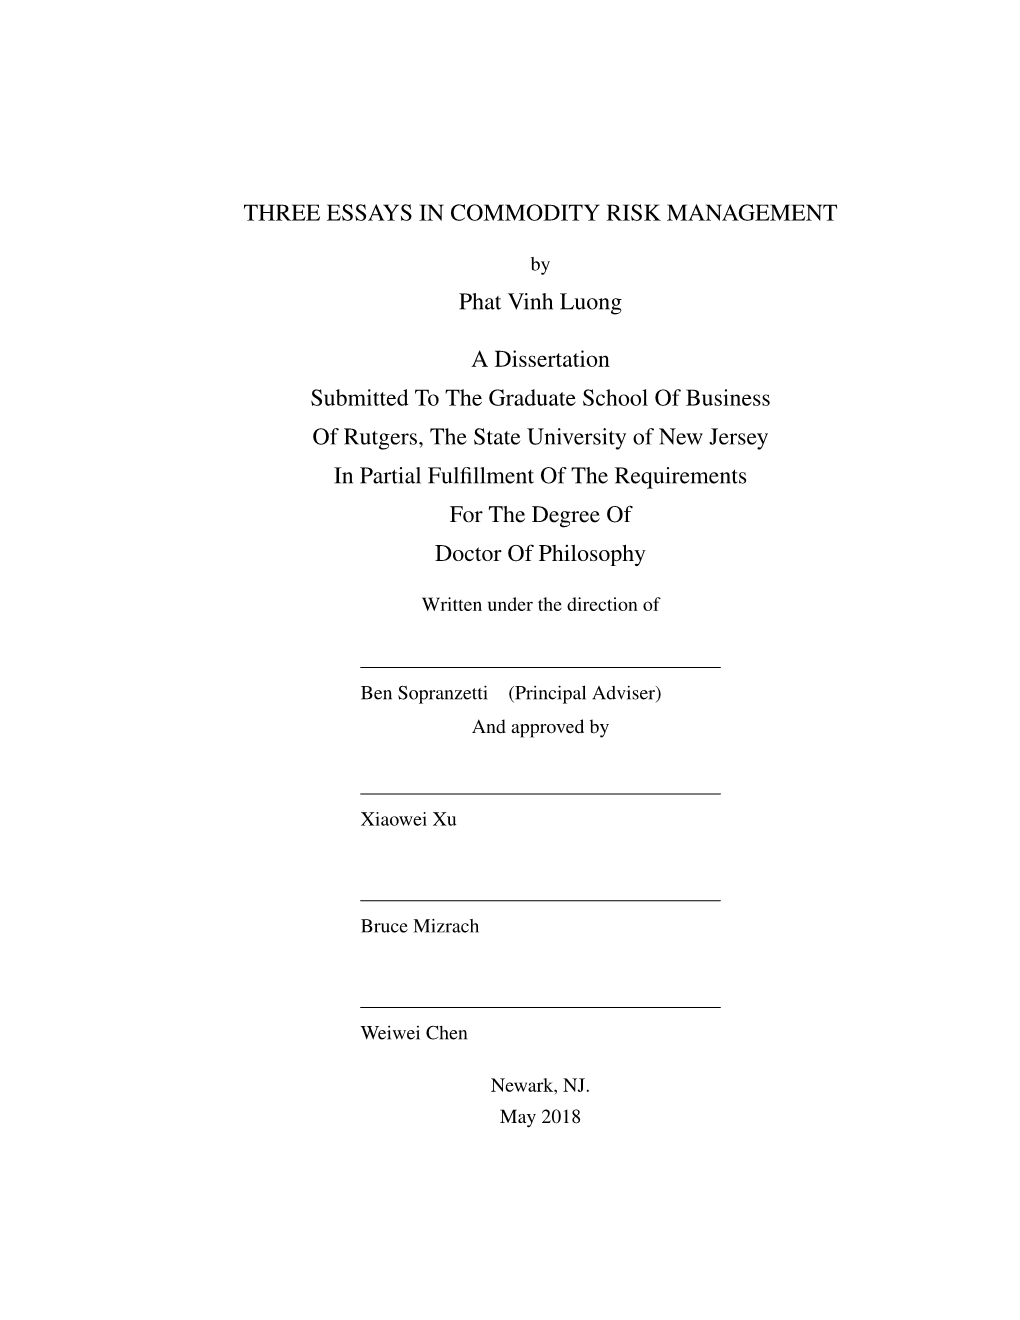 Three Essays in Commodity Risk Management